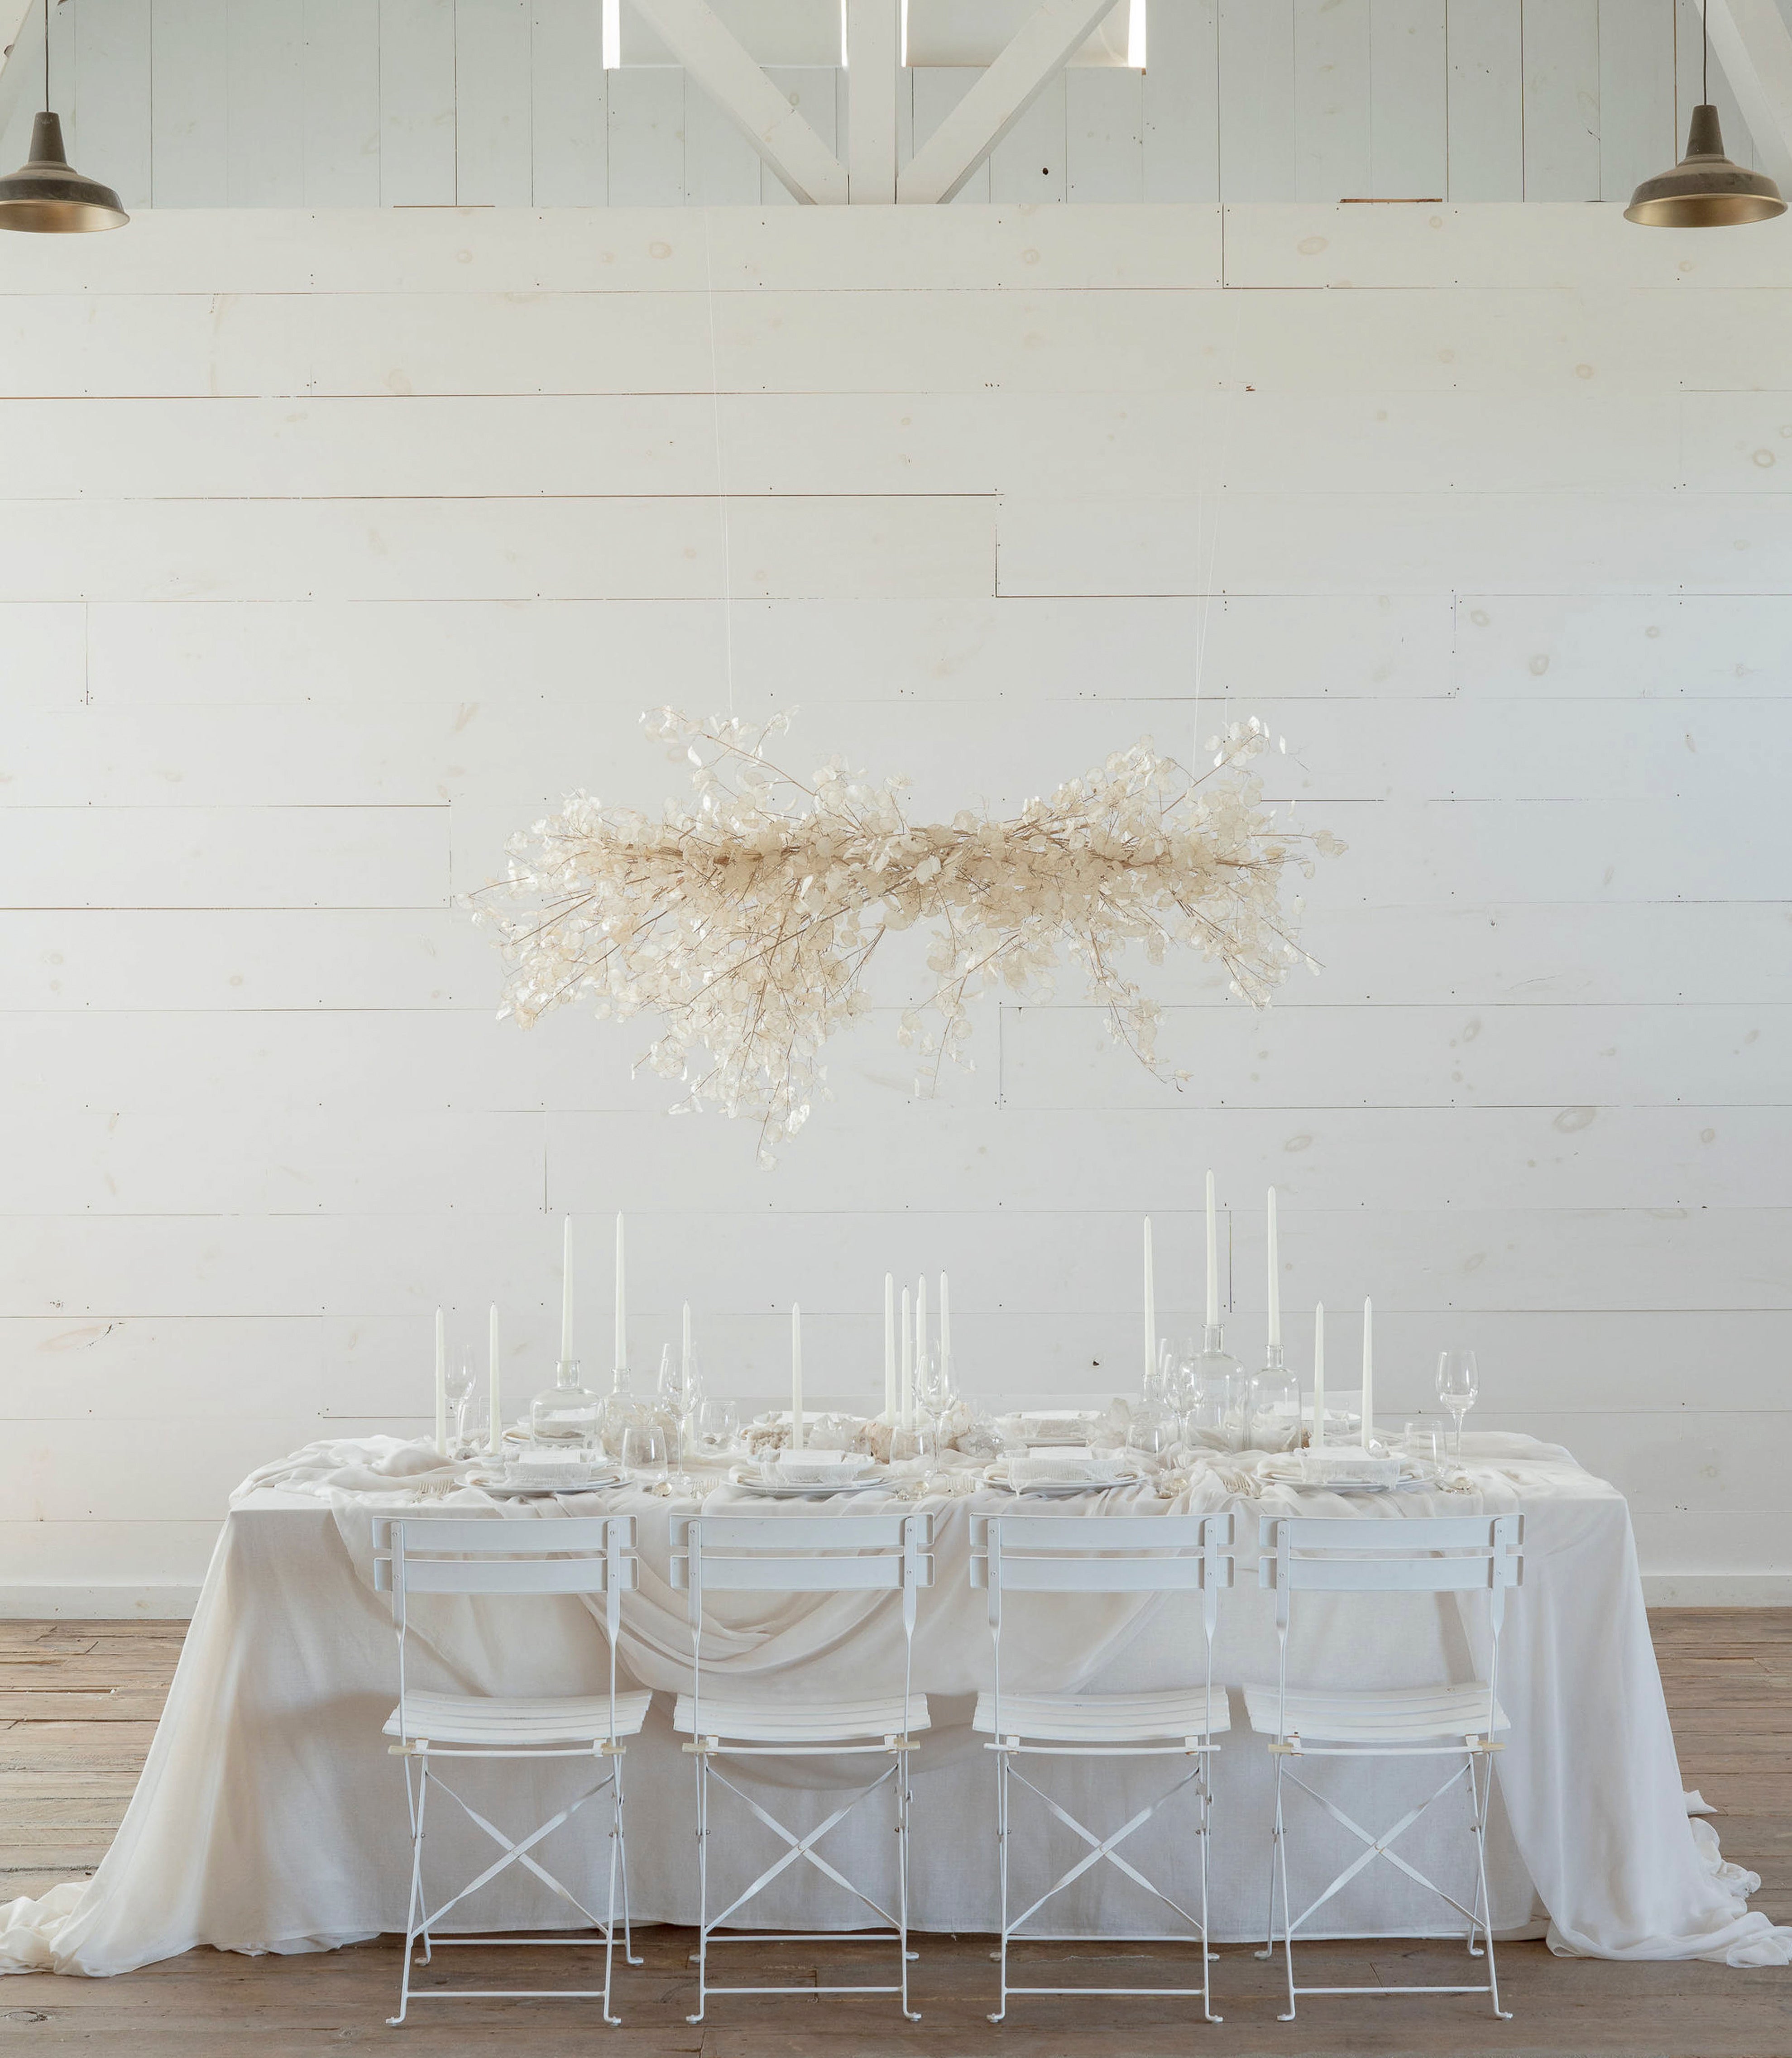 silk and willow table setting design  with custom table linens for your wedding decor